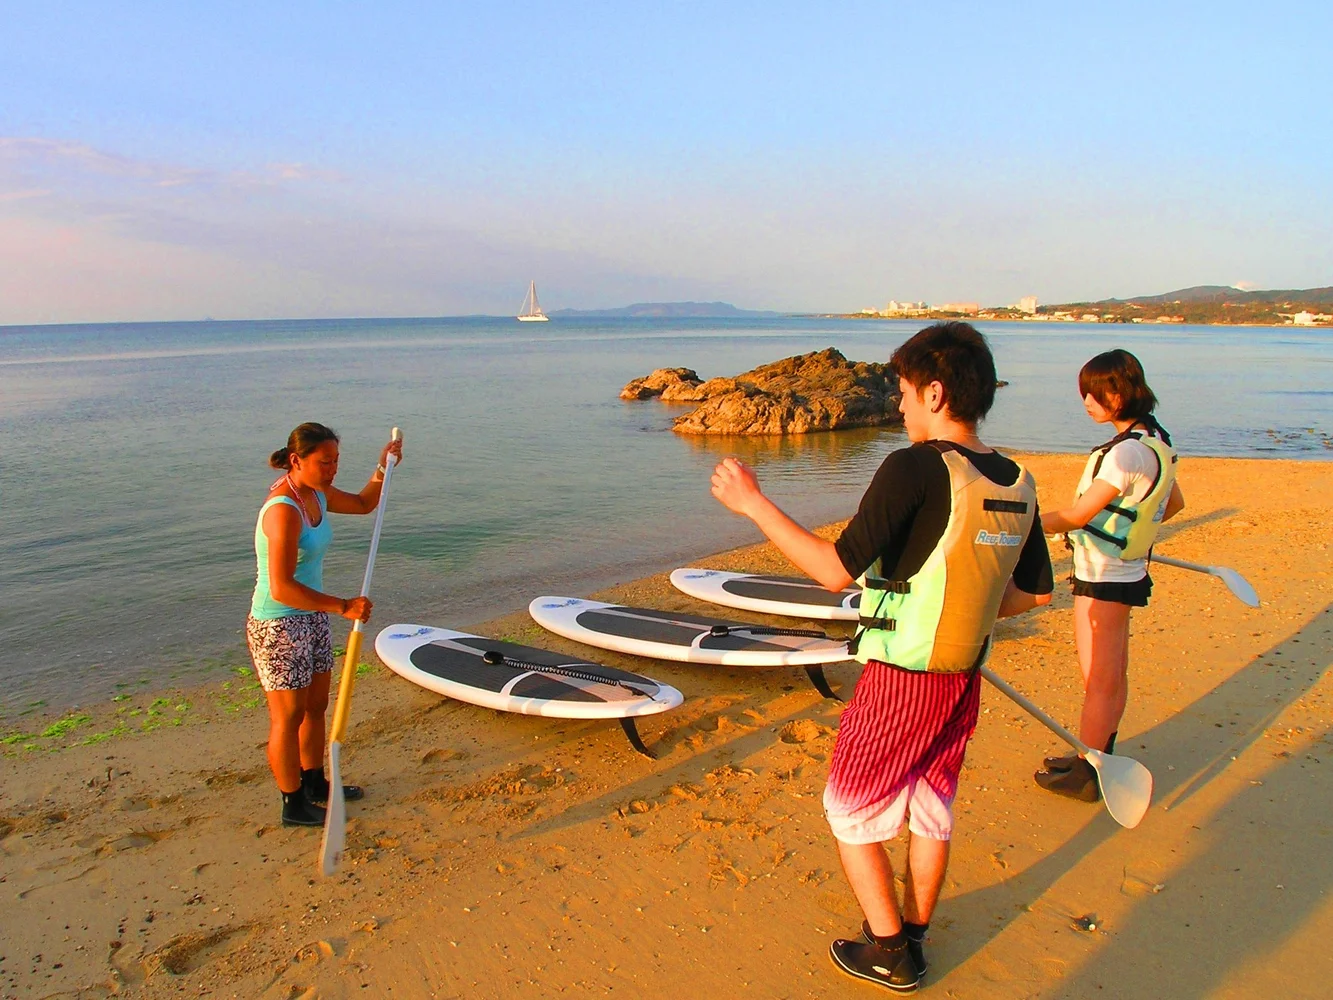 Try a Stand Up Paddle adventure in Okinawa!